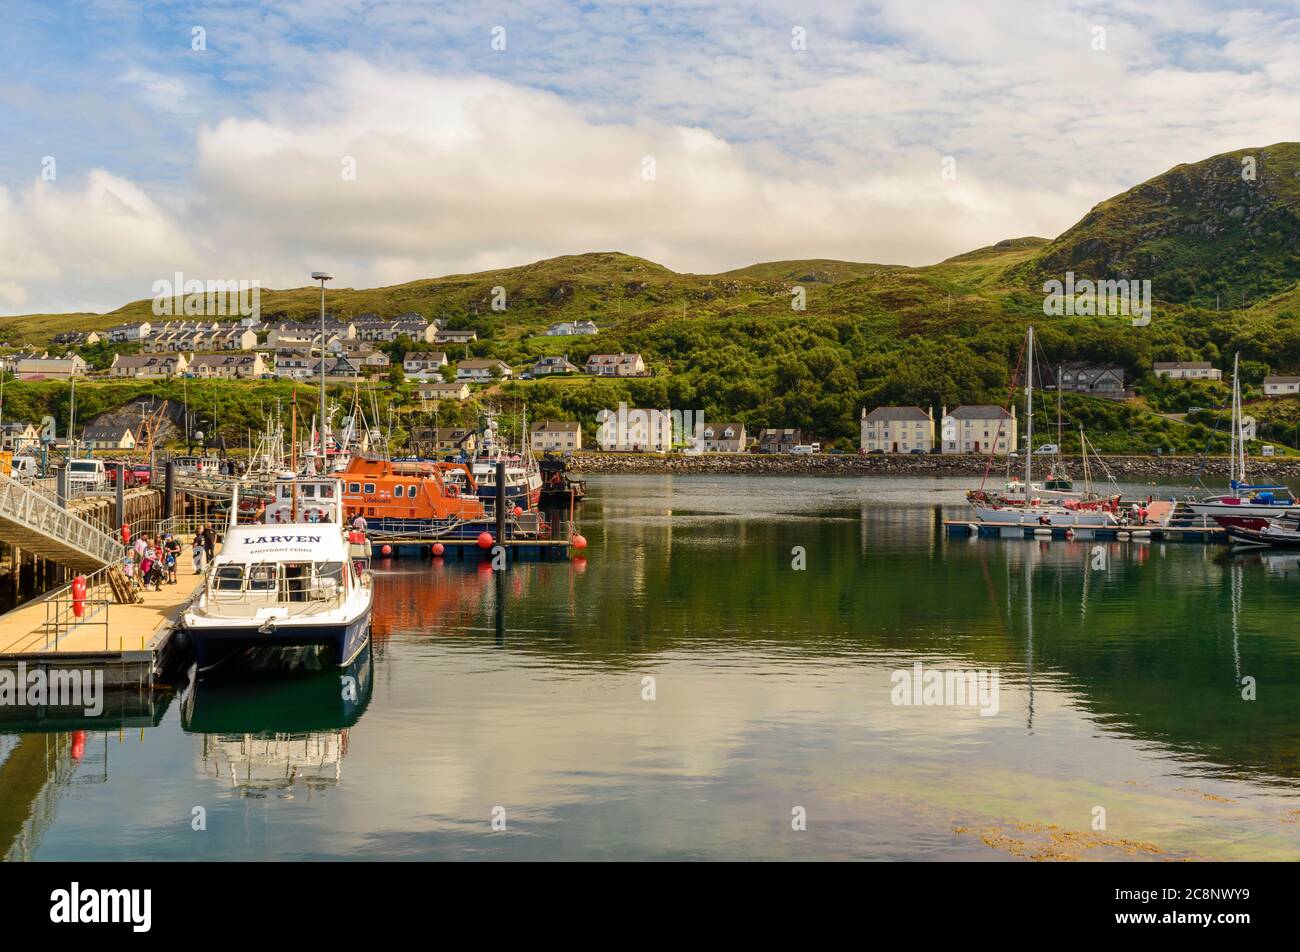 MALLAIG HARBOUR LOCHABER WEST COAST SCOTLAND WITH BOATS INCLUDING A LIFEBOAT AND PASSENGERS FOR THE LARVEN KNOYDART FERRY Stock Photo